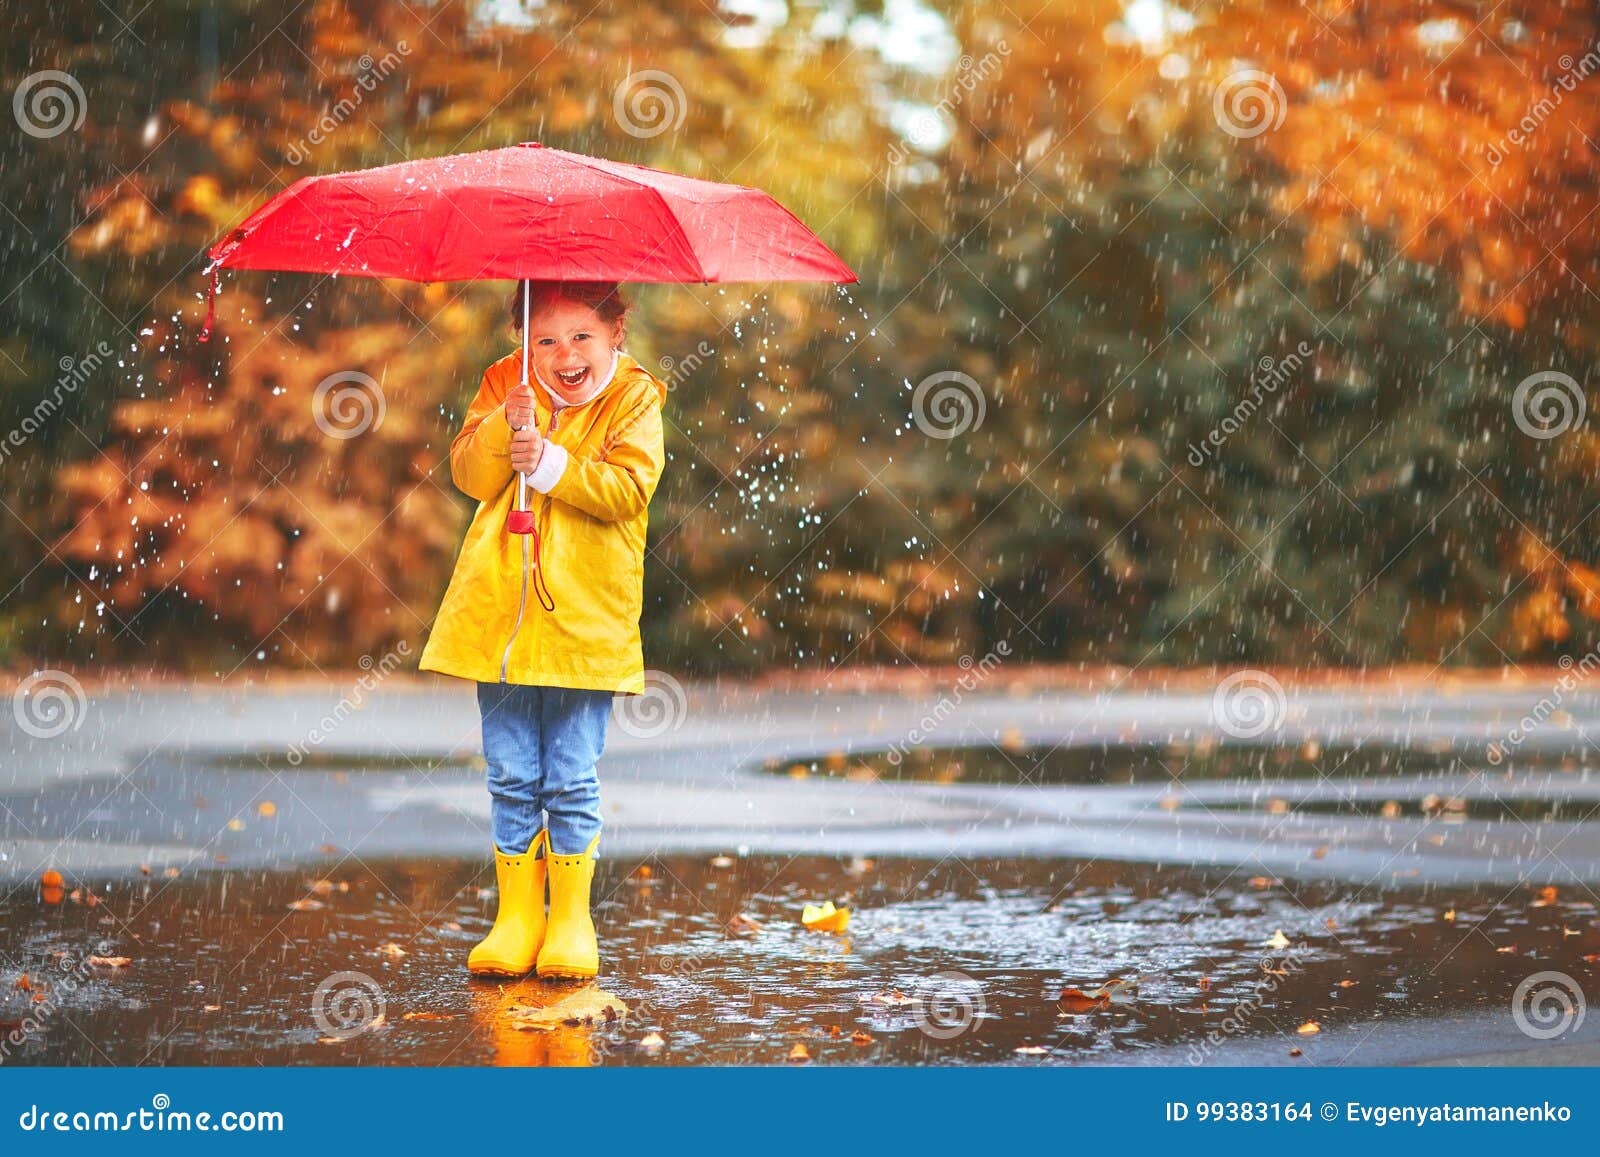 happy child girl with an umbrella and rubber boots in puddle on